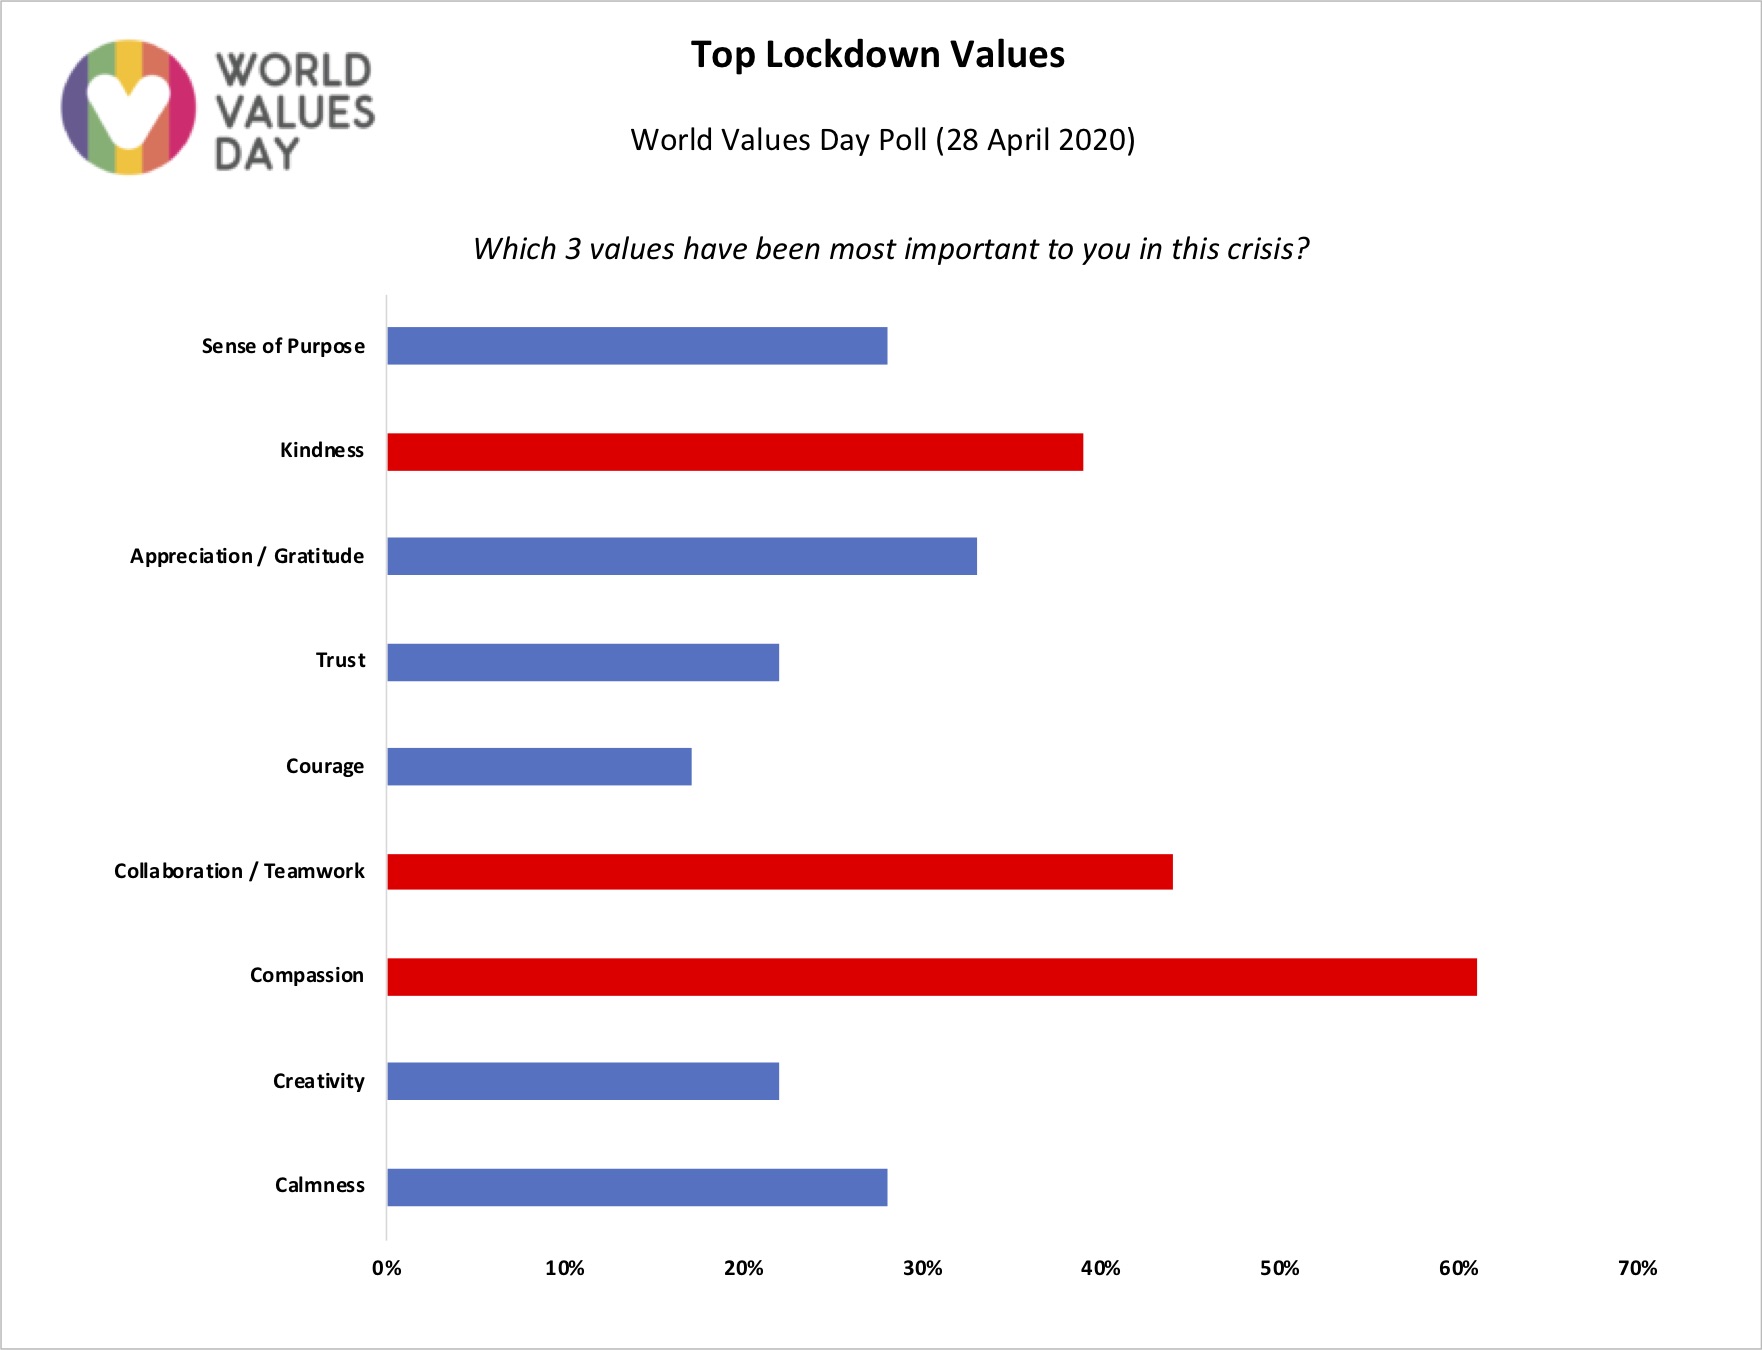 Compassion the top value in our Lockdown Values Poll